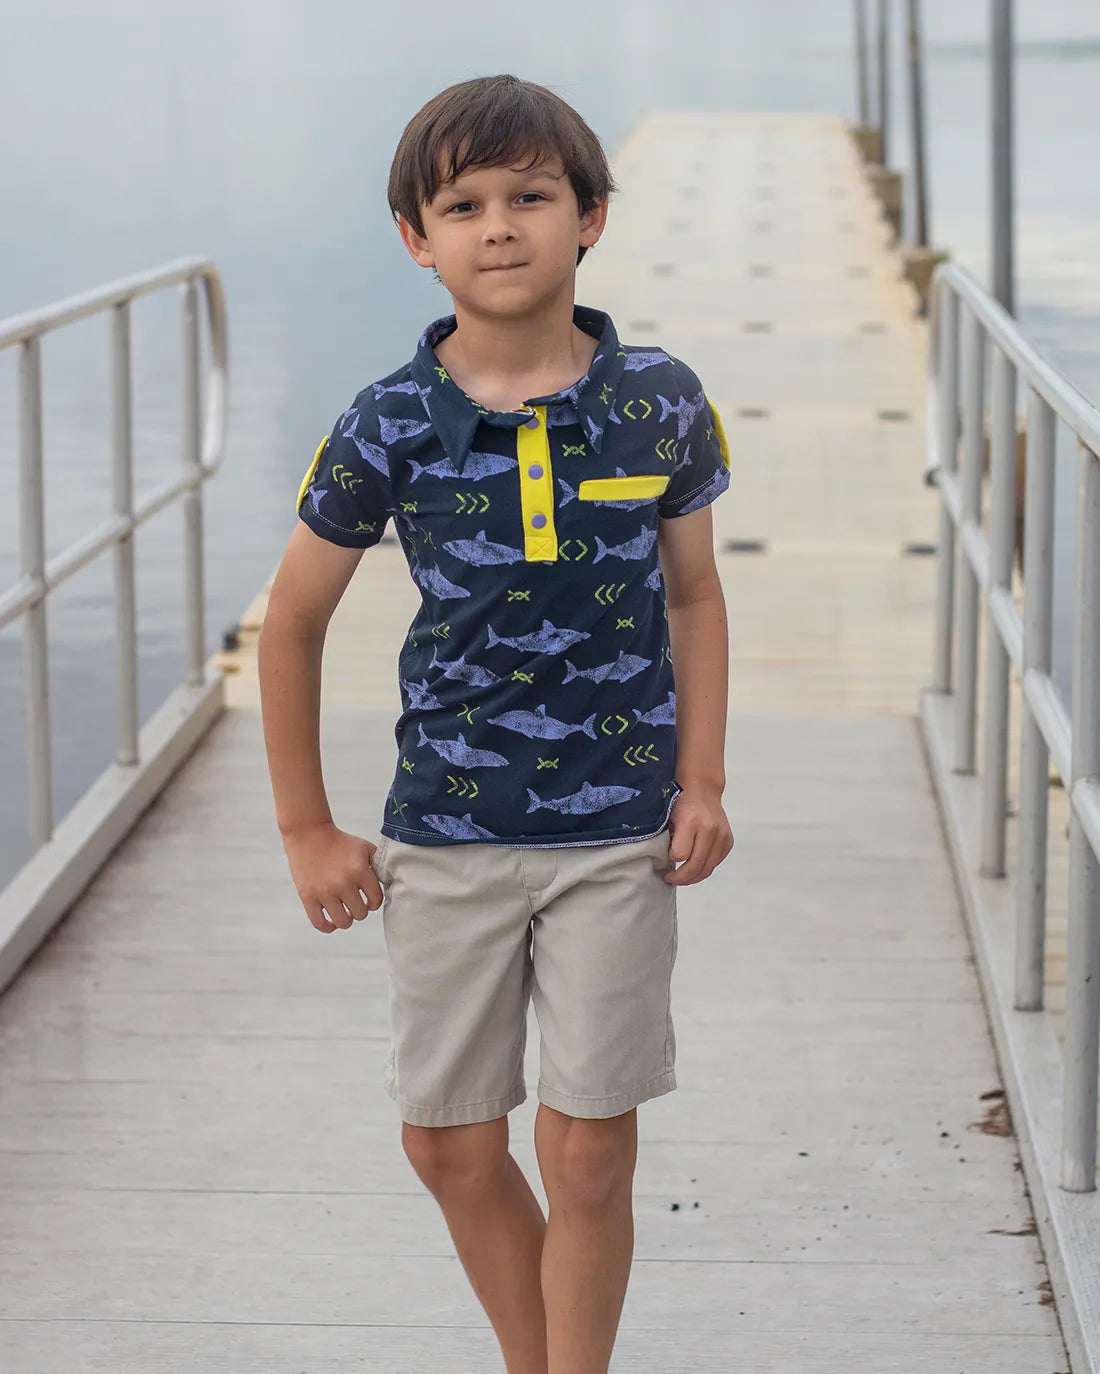 Pine Polo Top Digital Sewing Pattern